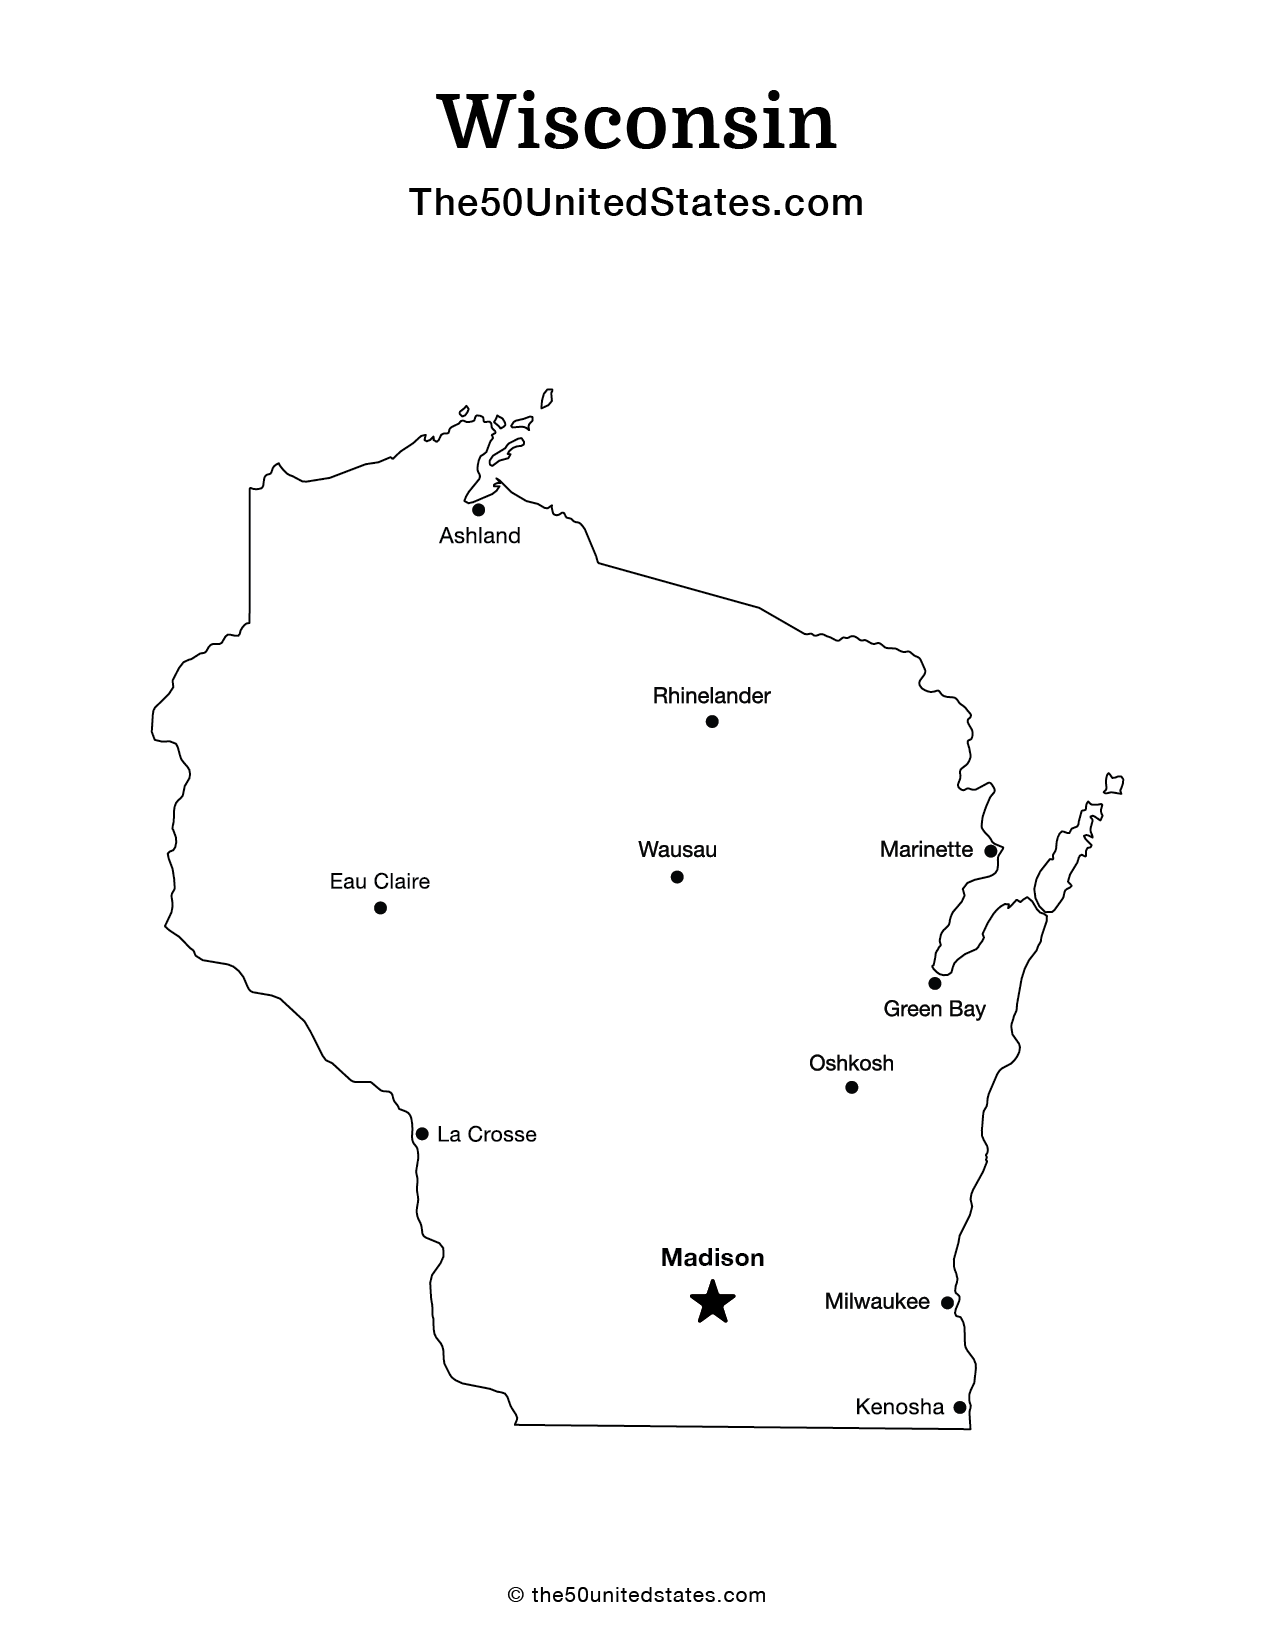 Map of Wisconsin with Cities (Labeled)